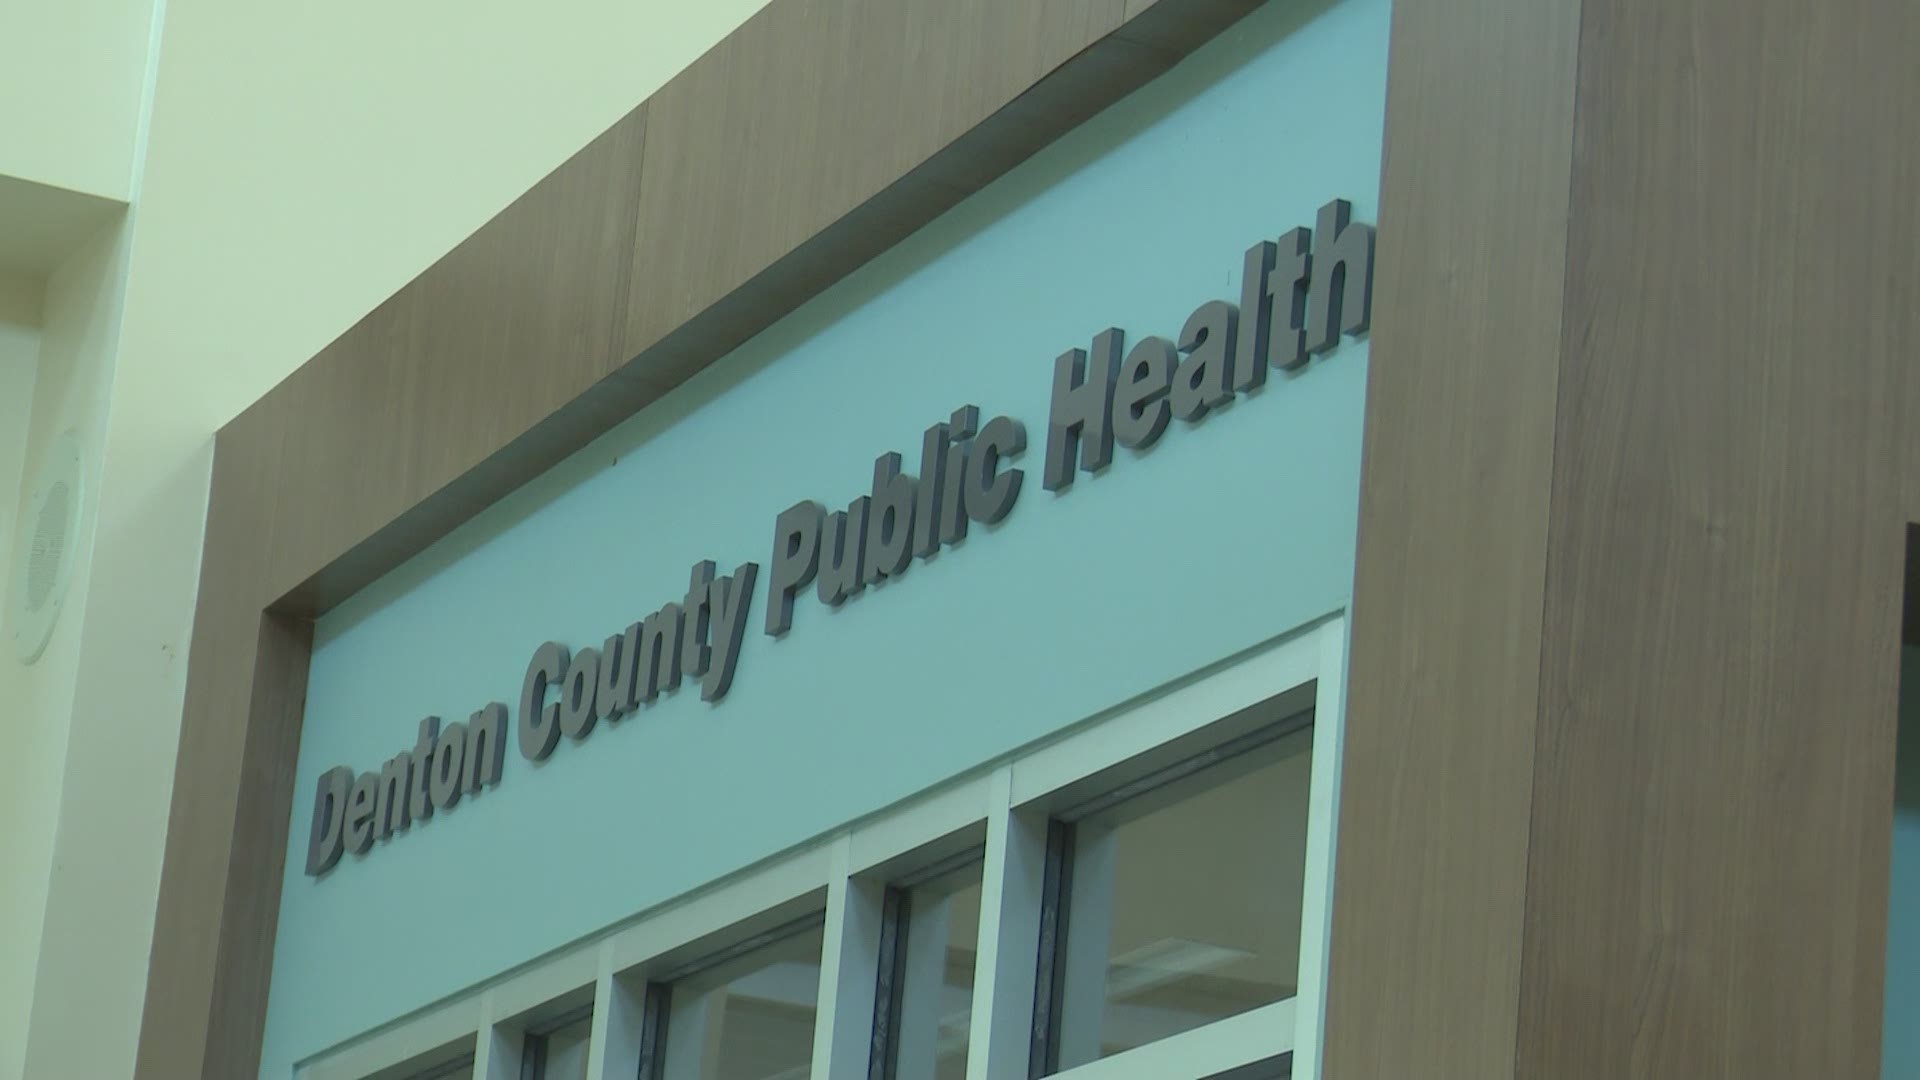 'We are still very much in an environment of scarcity,' said Denton County Public Health Director Matt Richardson.